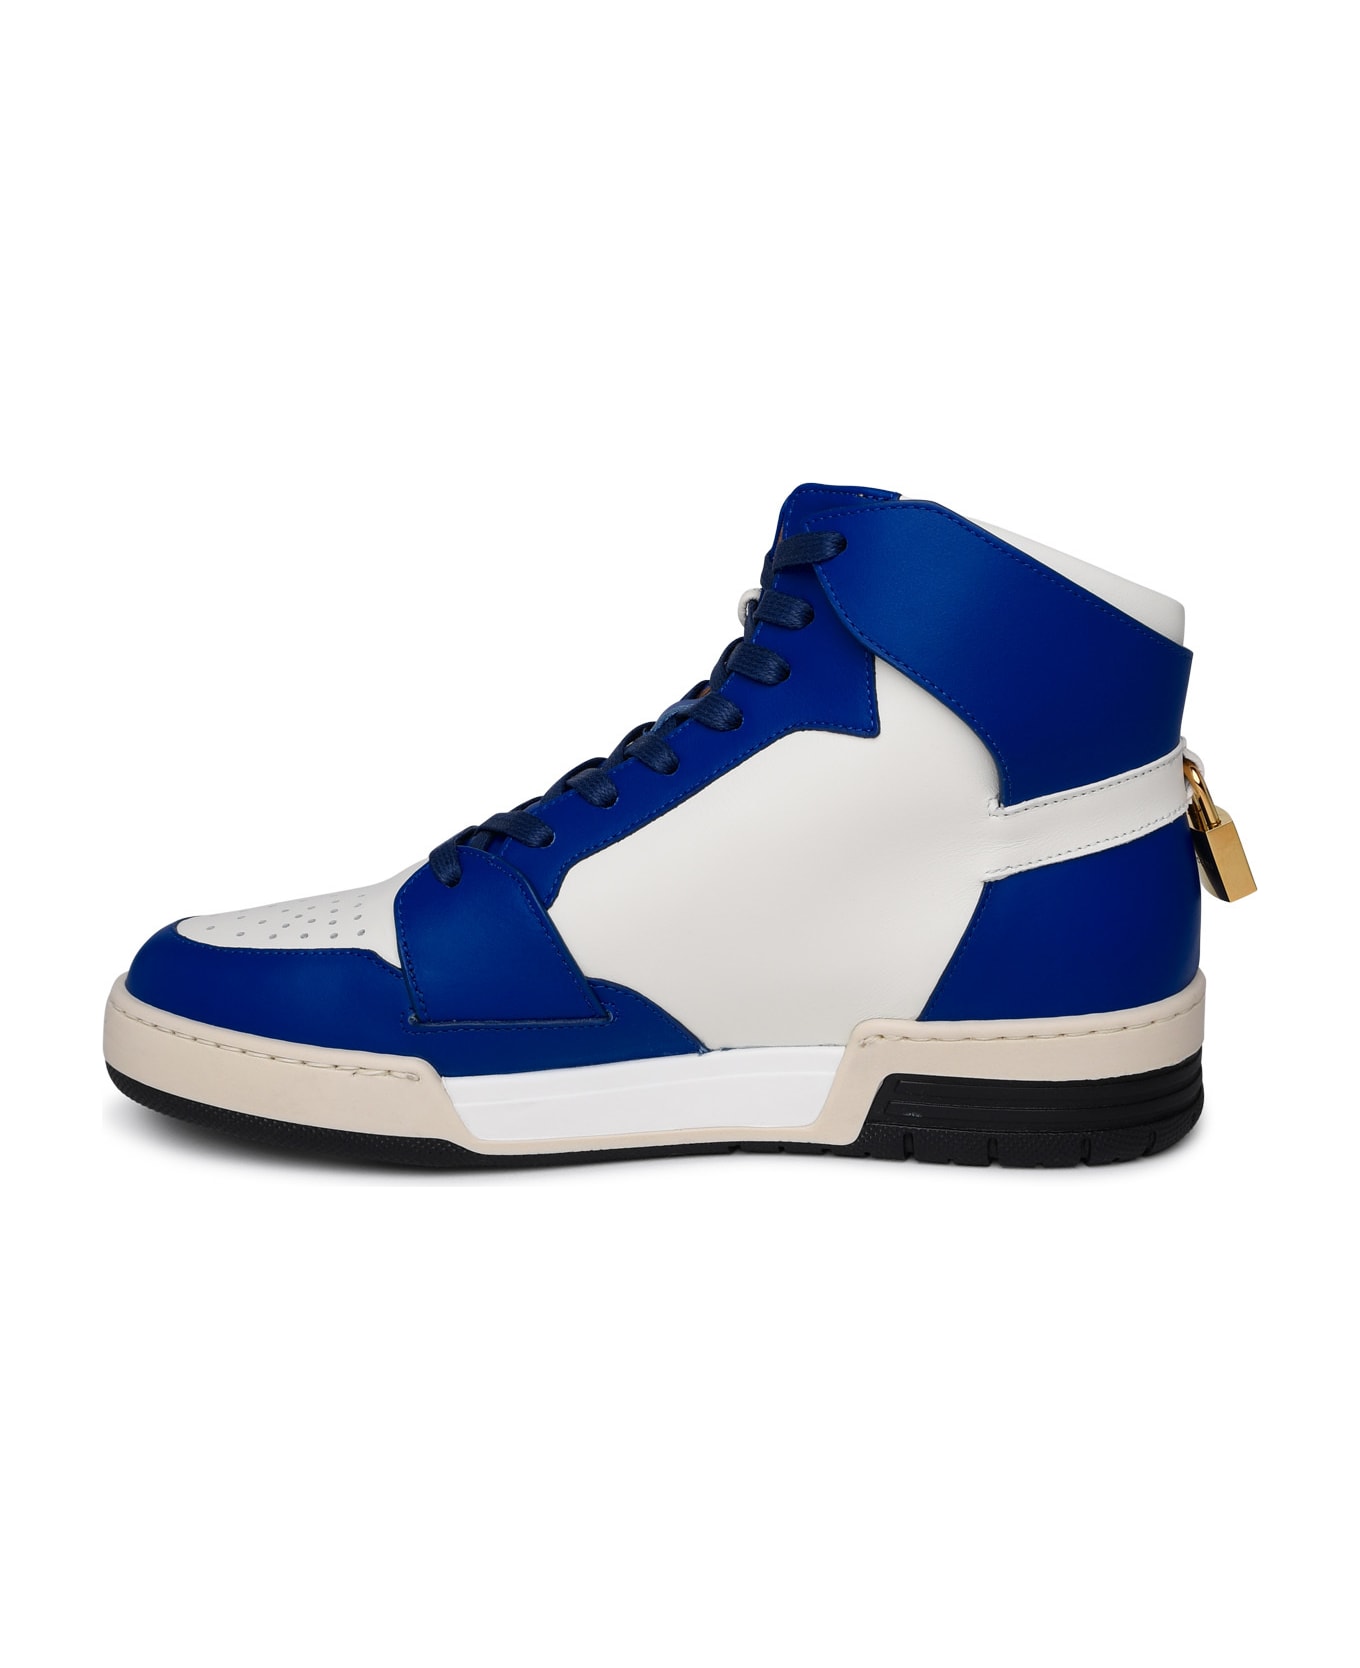 Buscemi 'air Jon' White And Blue Leather Sneakers - White